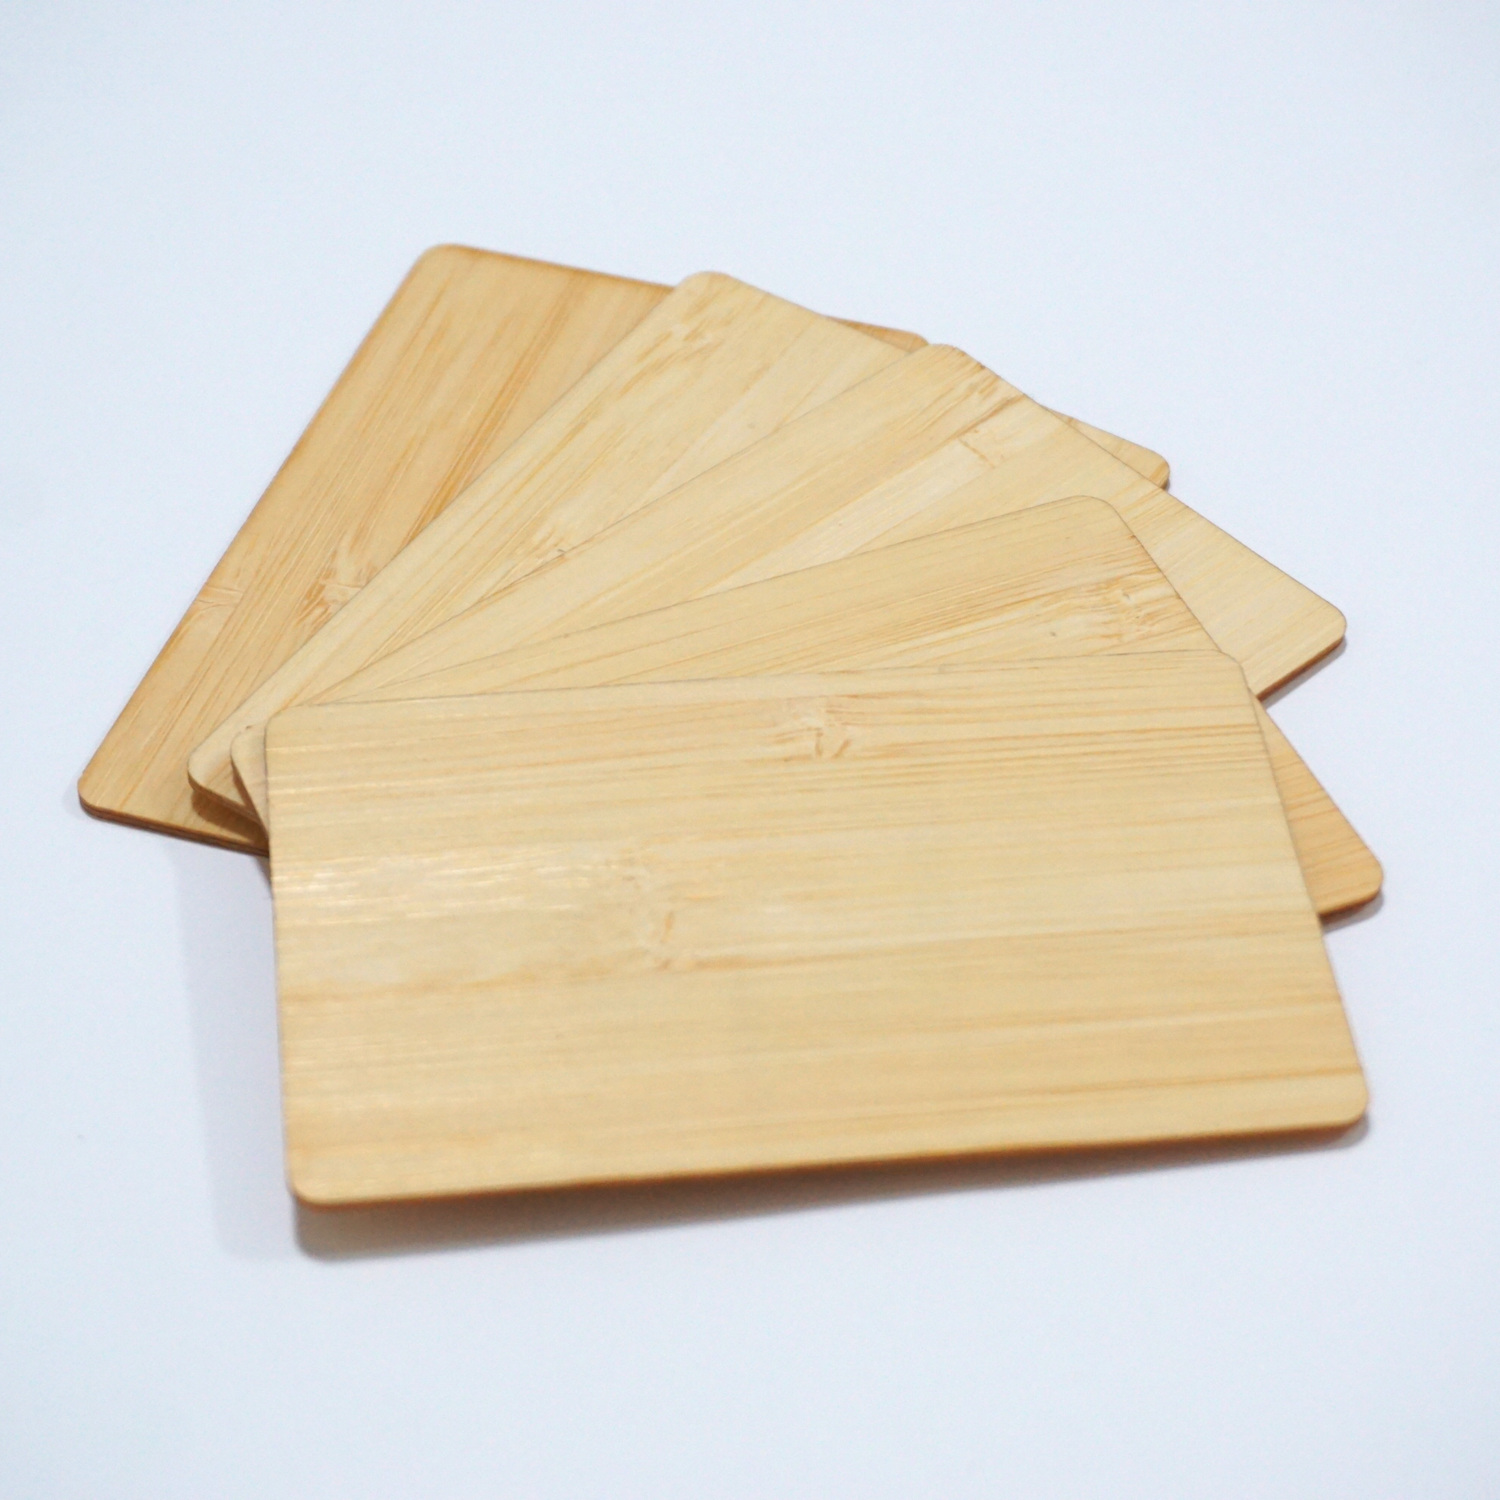 NFC card with bamboo face material